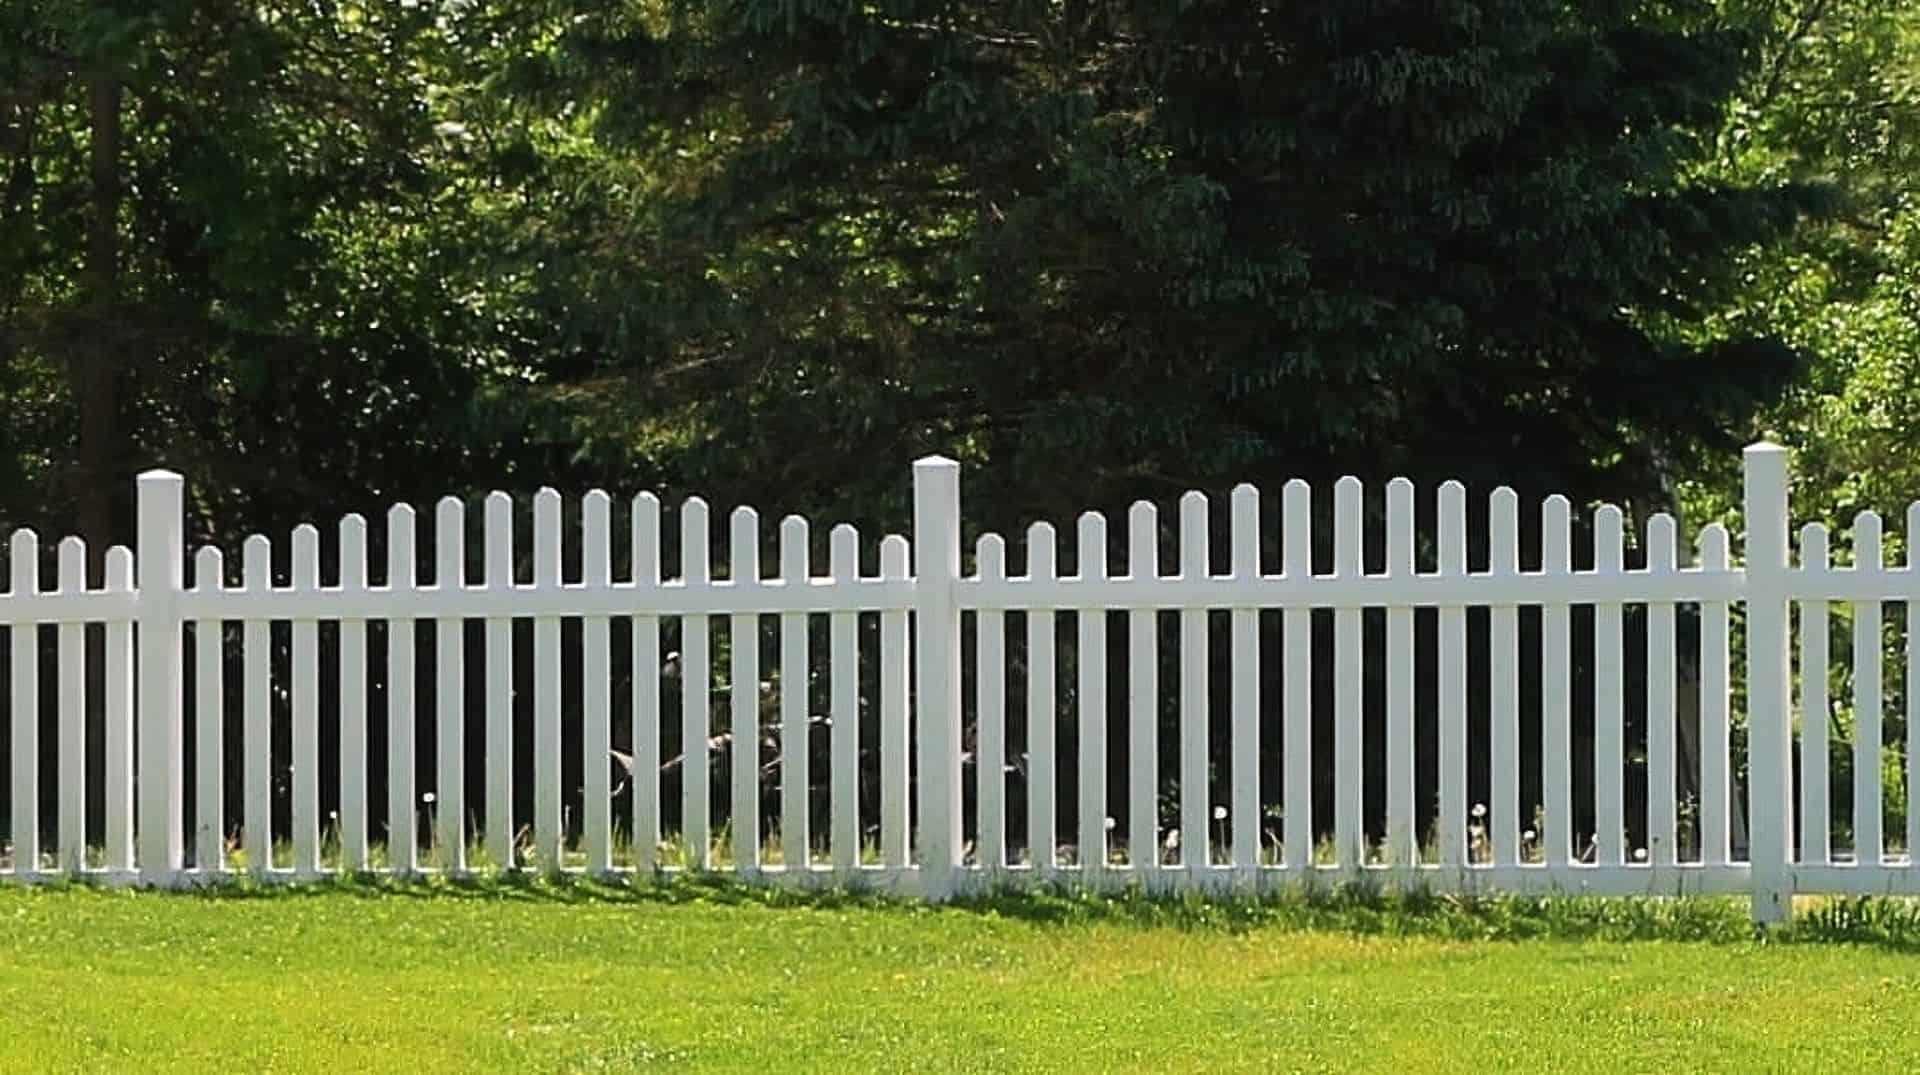 Vinyl arched picket fence bordering a grassy lawn with a small garden and trees in the background.